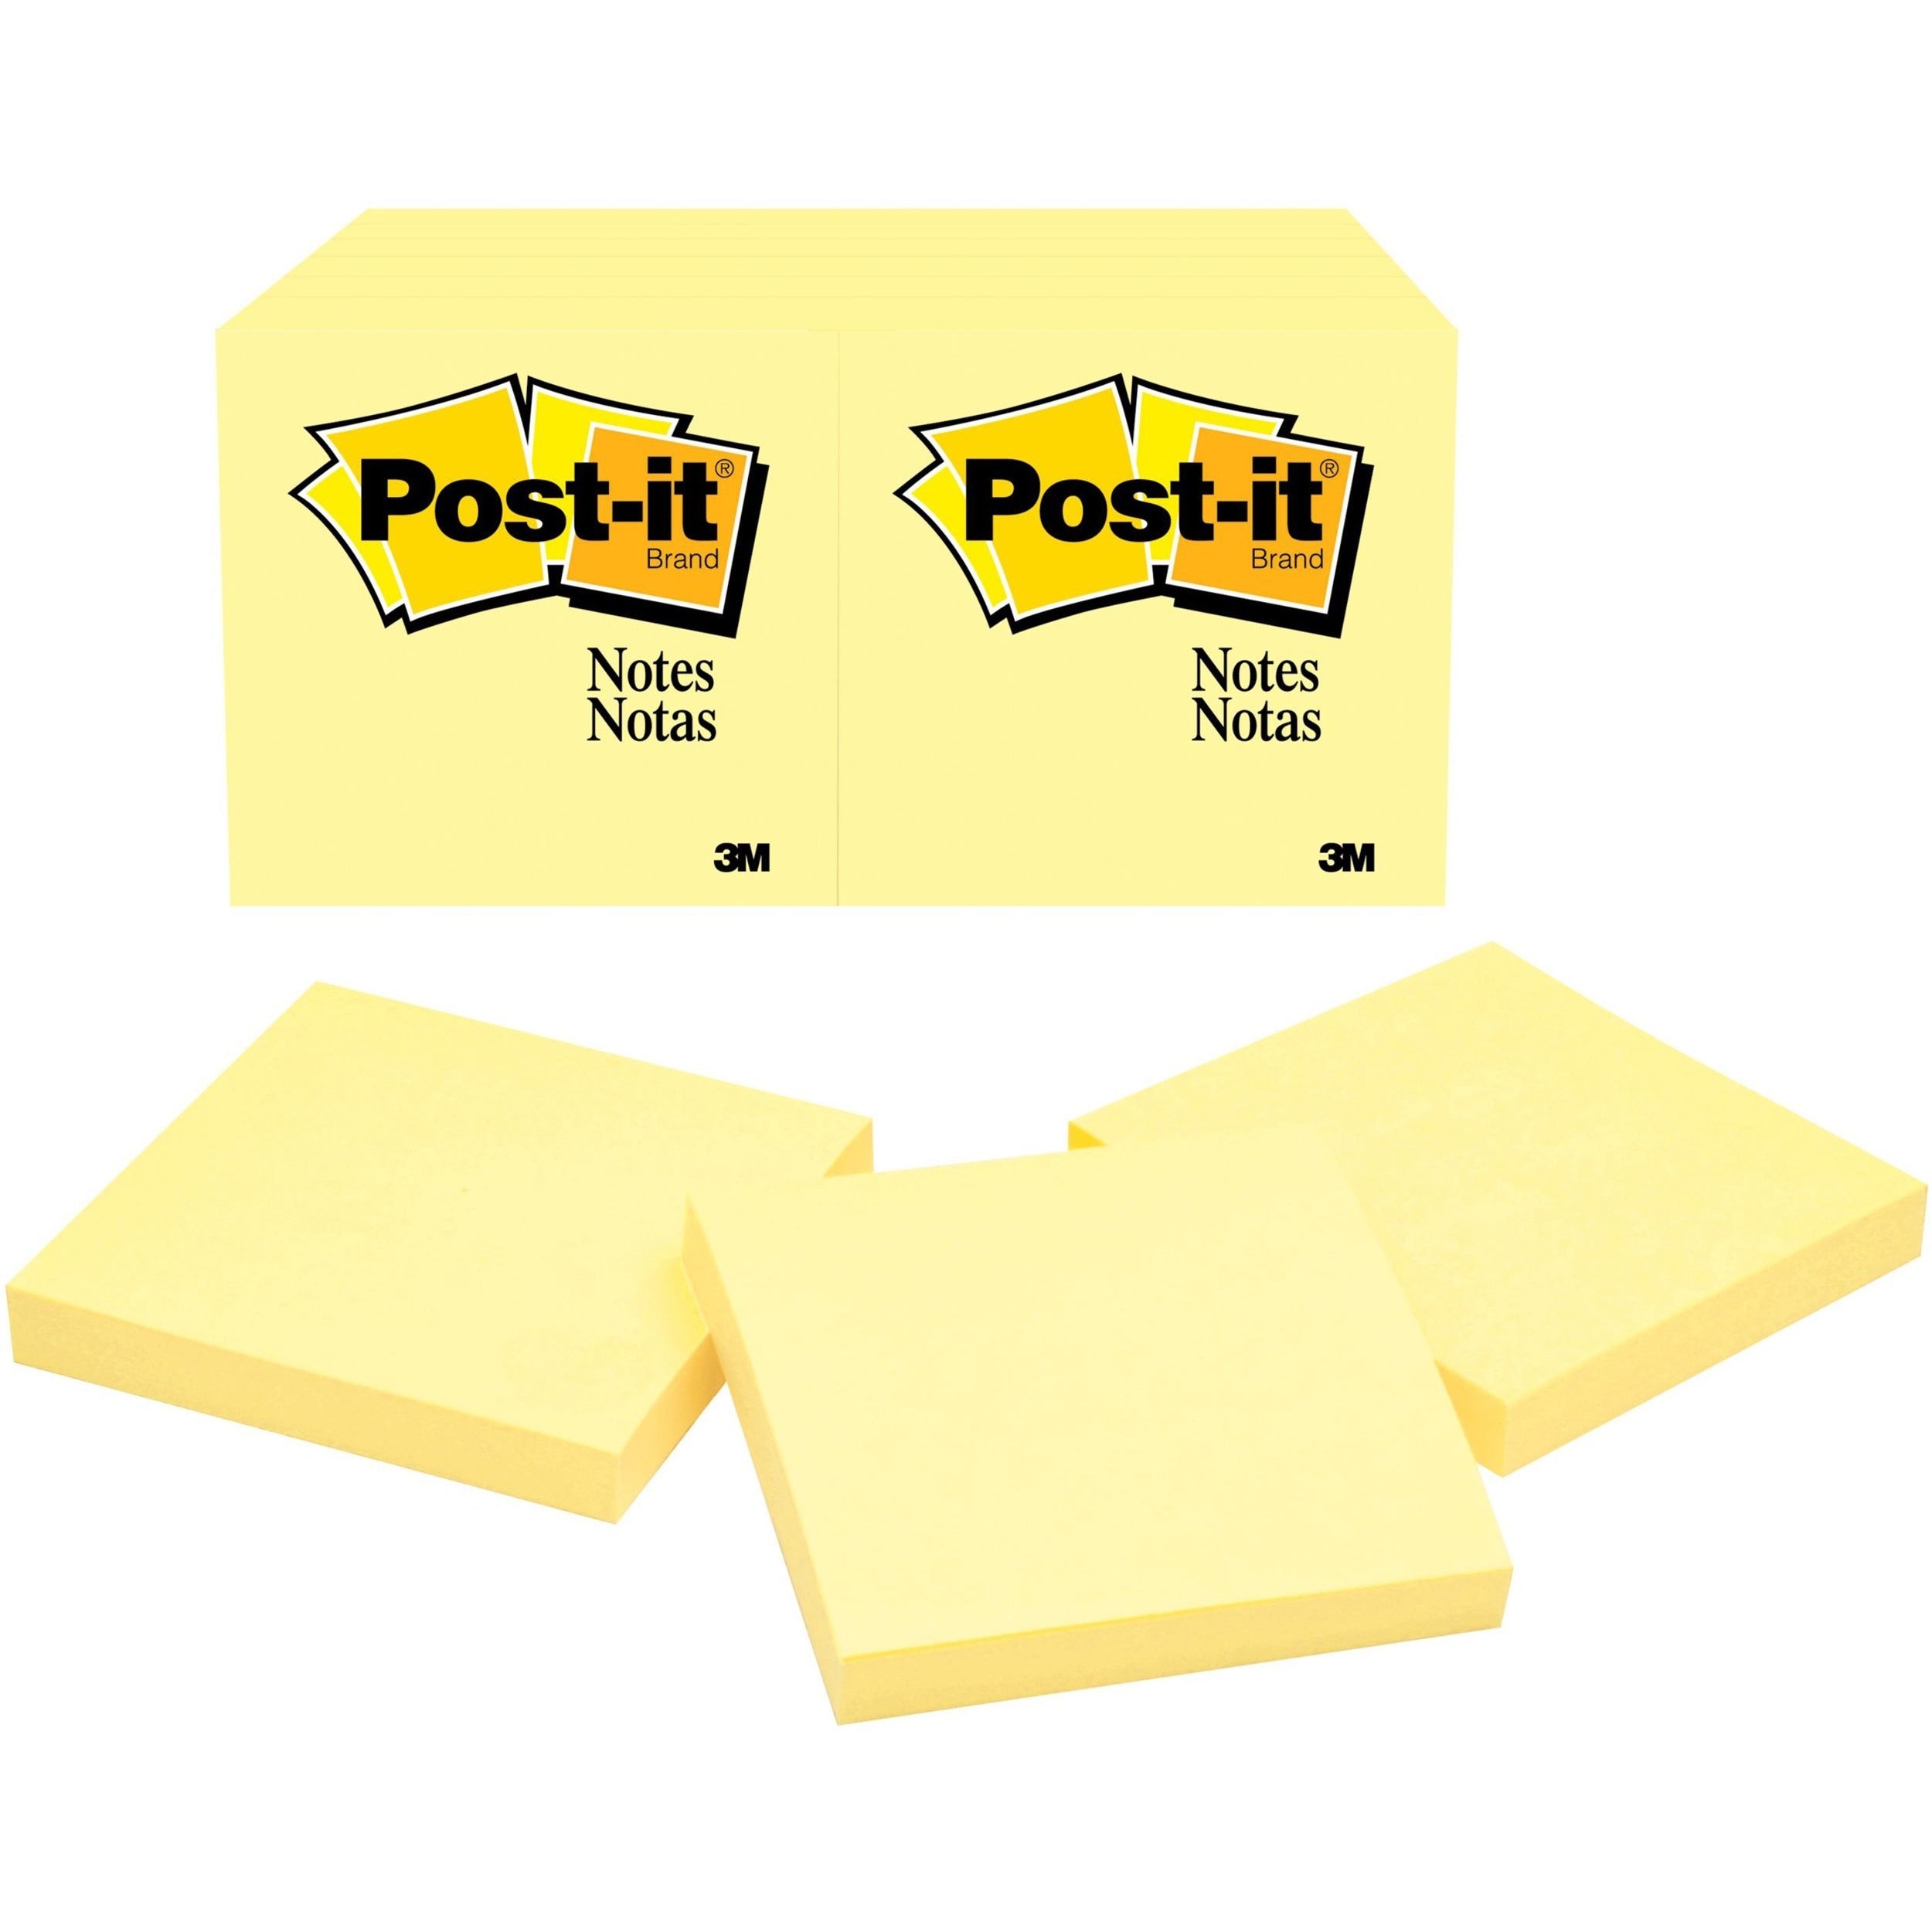 post-it-notes-original-notepads-3-x-3-square-100-sheets-per-pad-unruled-canary-yellow-paper-self-adhesive-repositionable-24-bundle_mmm654ywbd - 1